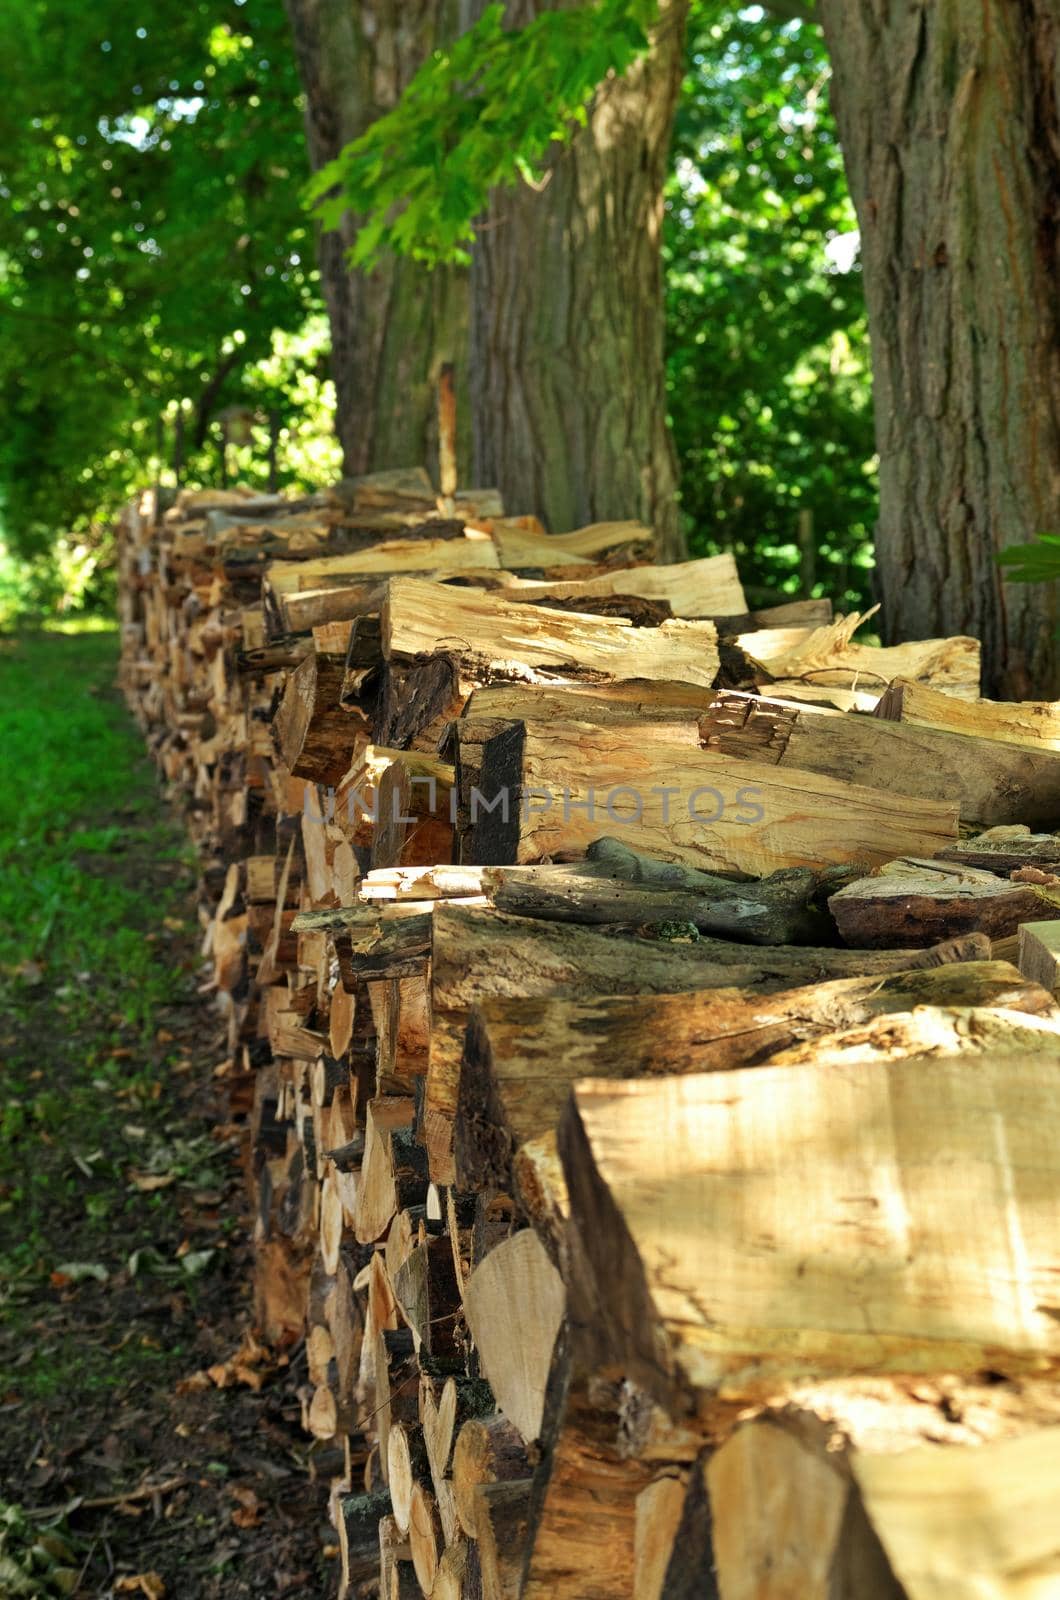 Chopped and Split Firewood Piled and Stacked Beneath Maple Trees in the Summer Time. High quality photo